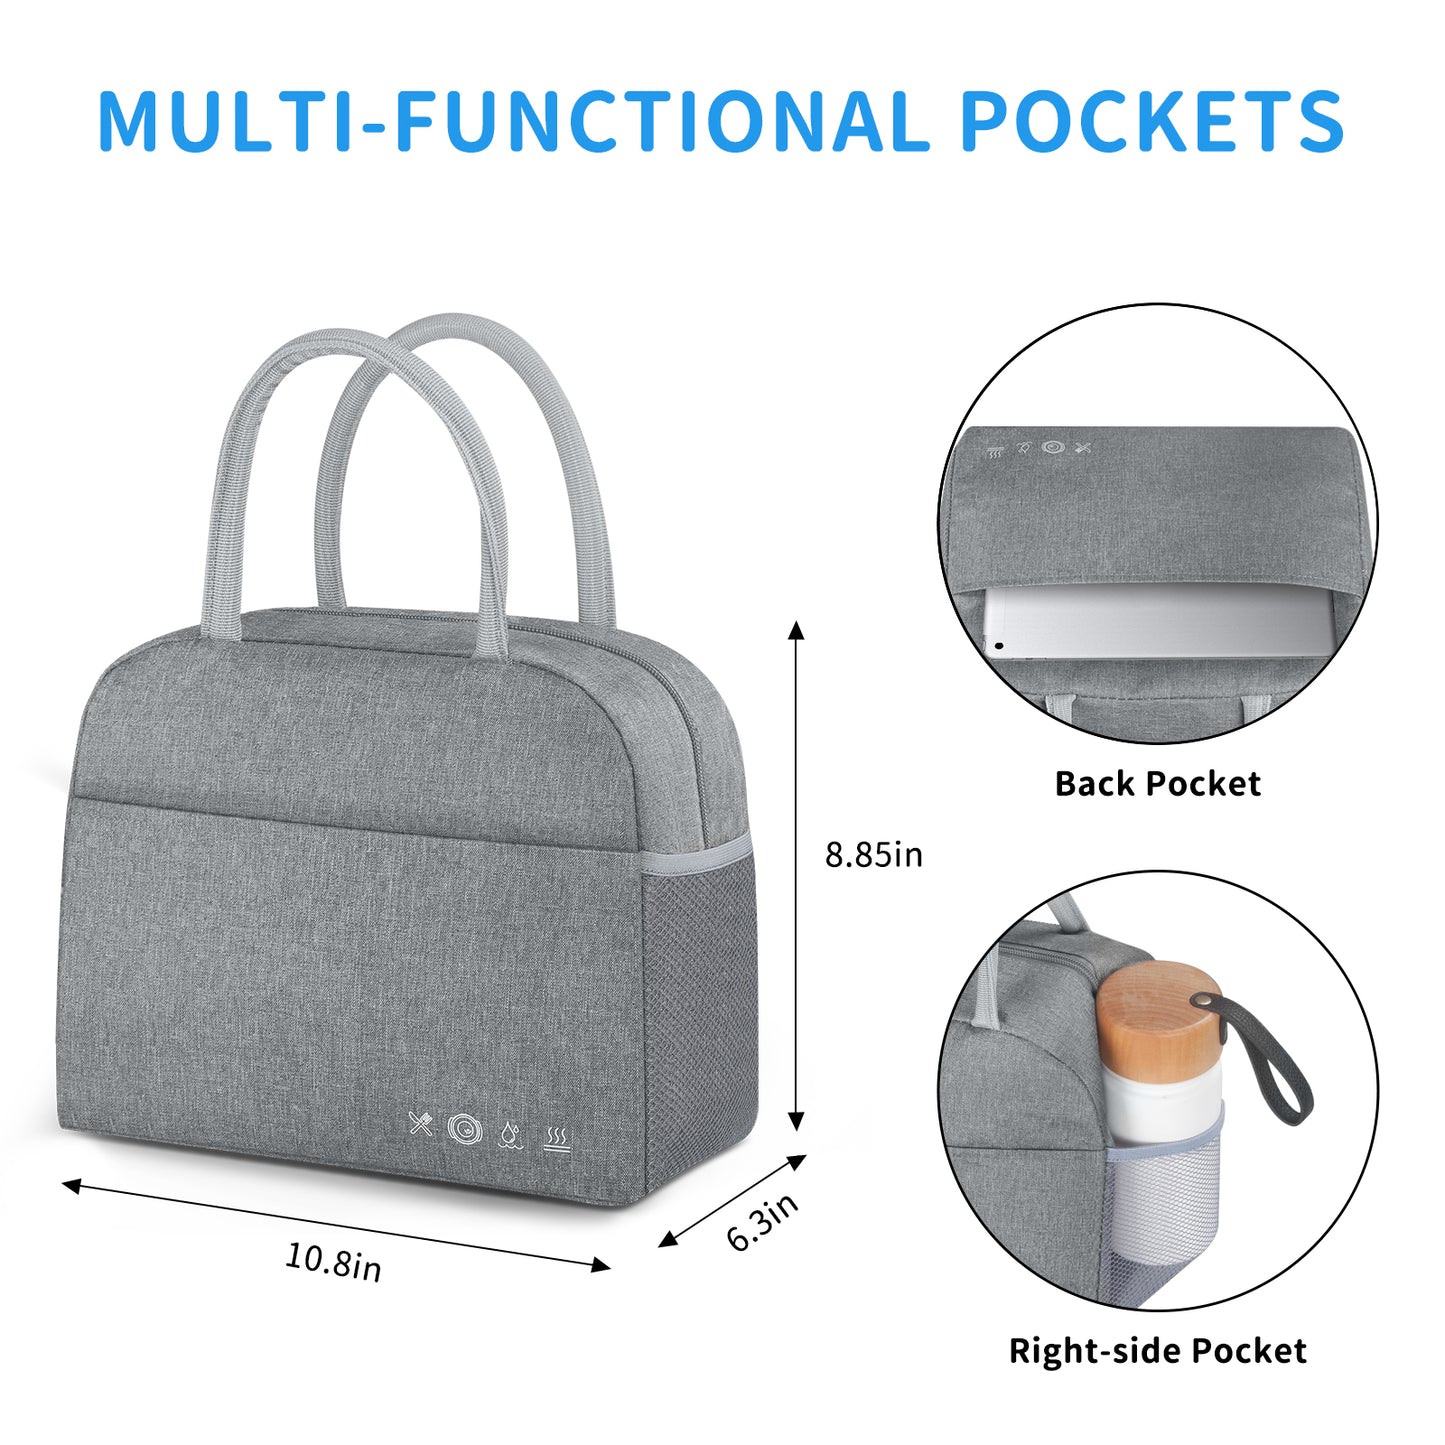 DALINDA Lunch Bag Lunch Box for Women Men Reusable Insulated Lunch Tote Bag,Leakproof Thermal Cooler Sack Food Handbags Case High Capacity forTravel Work School Picnic- Grey